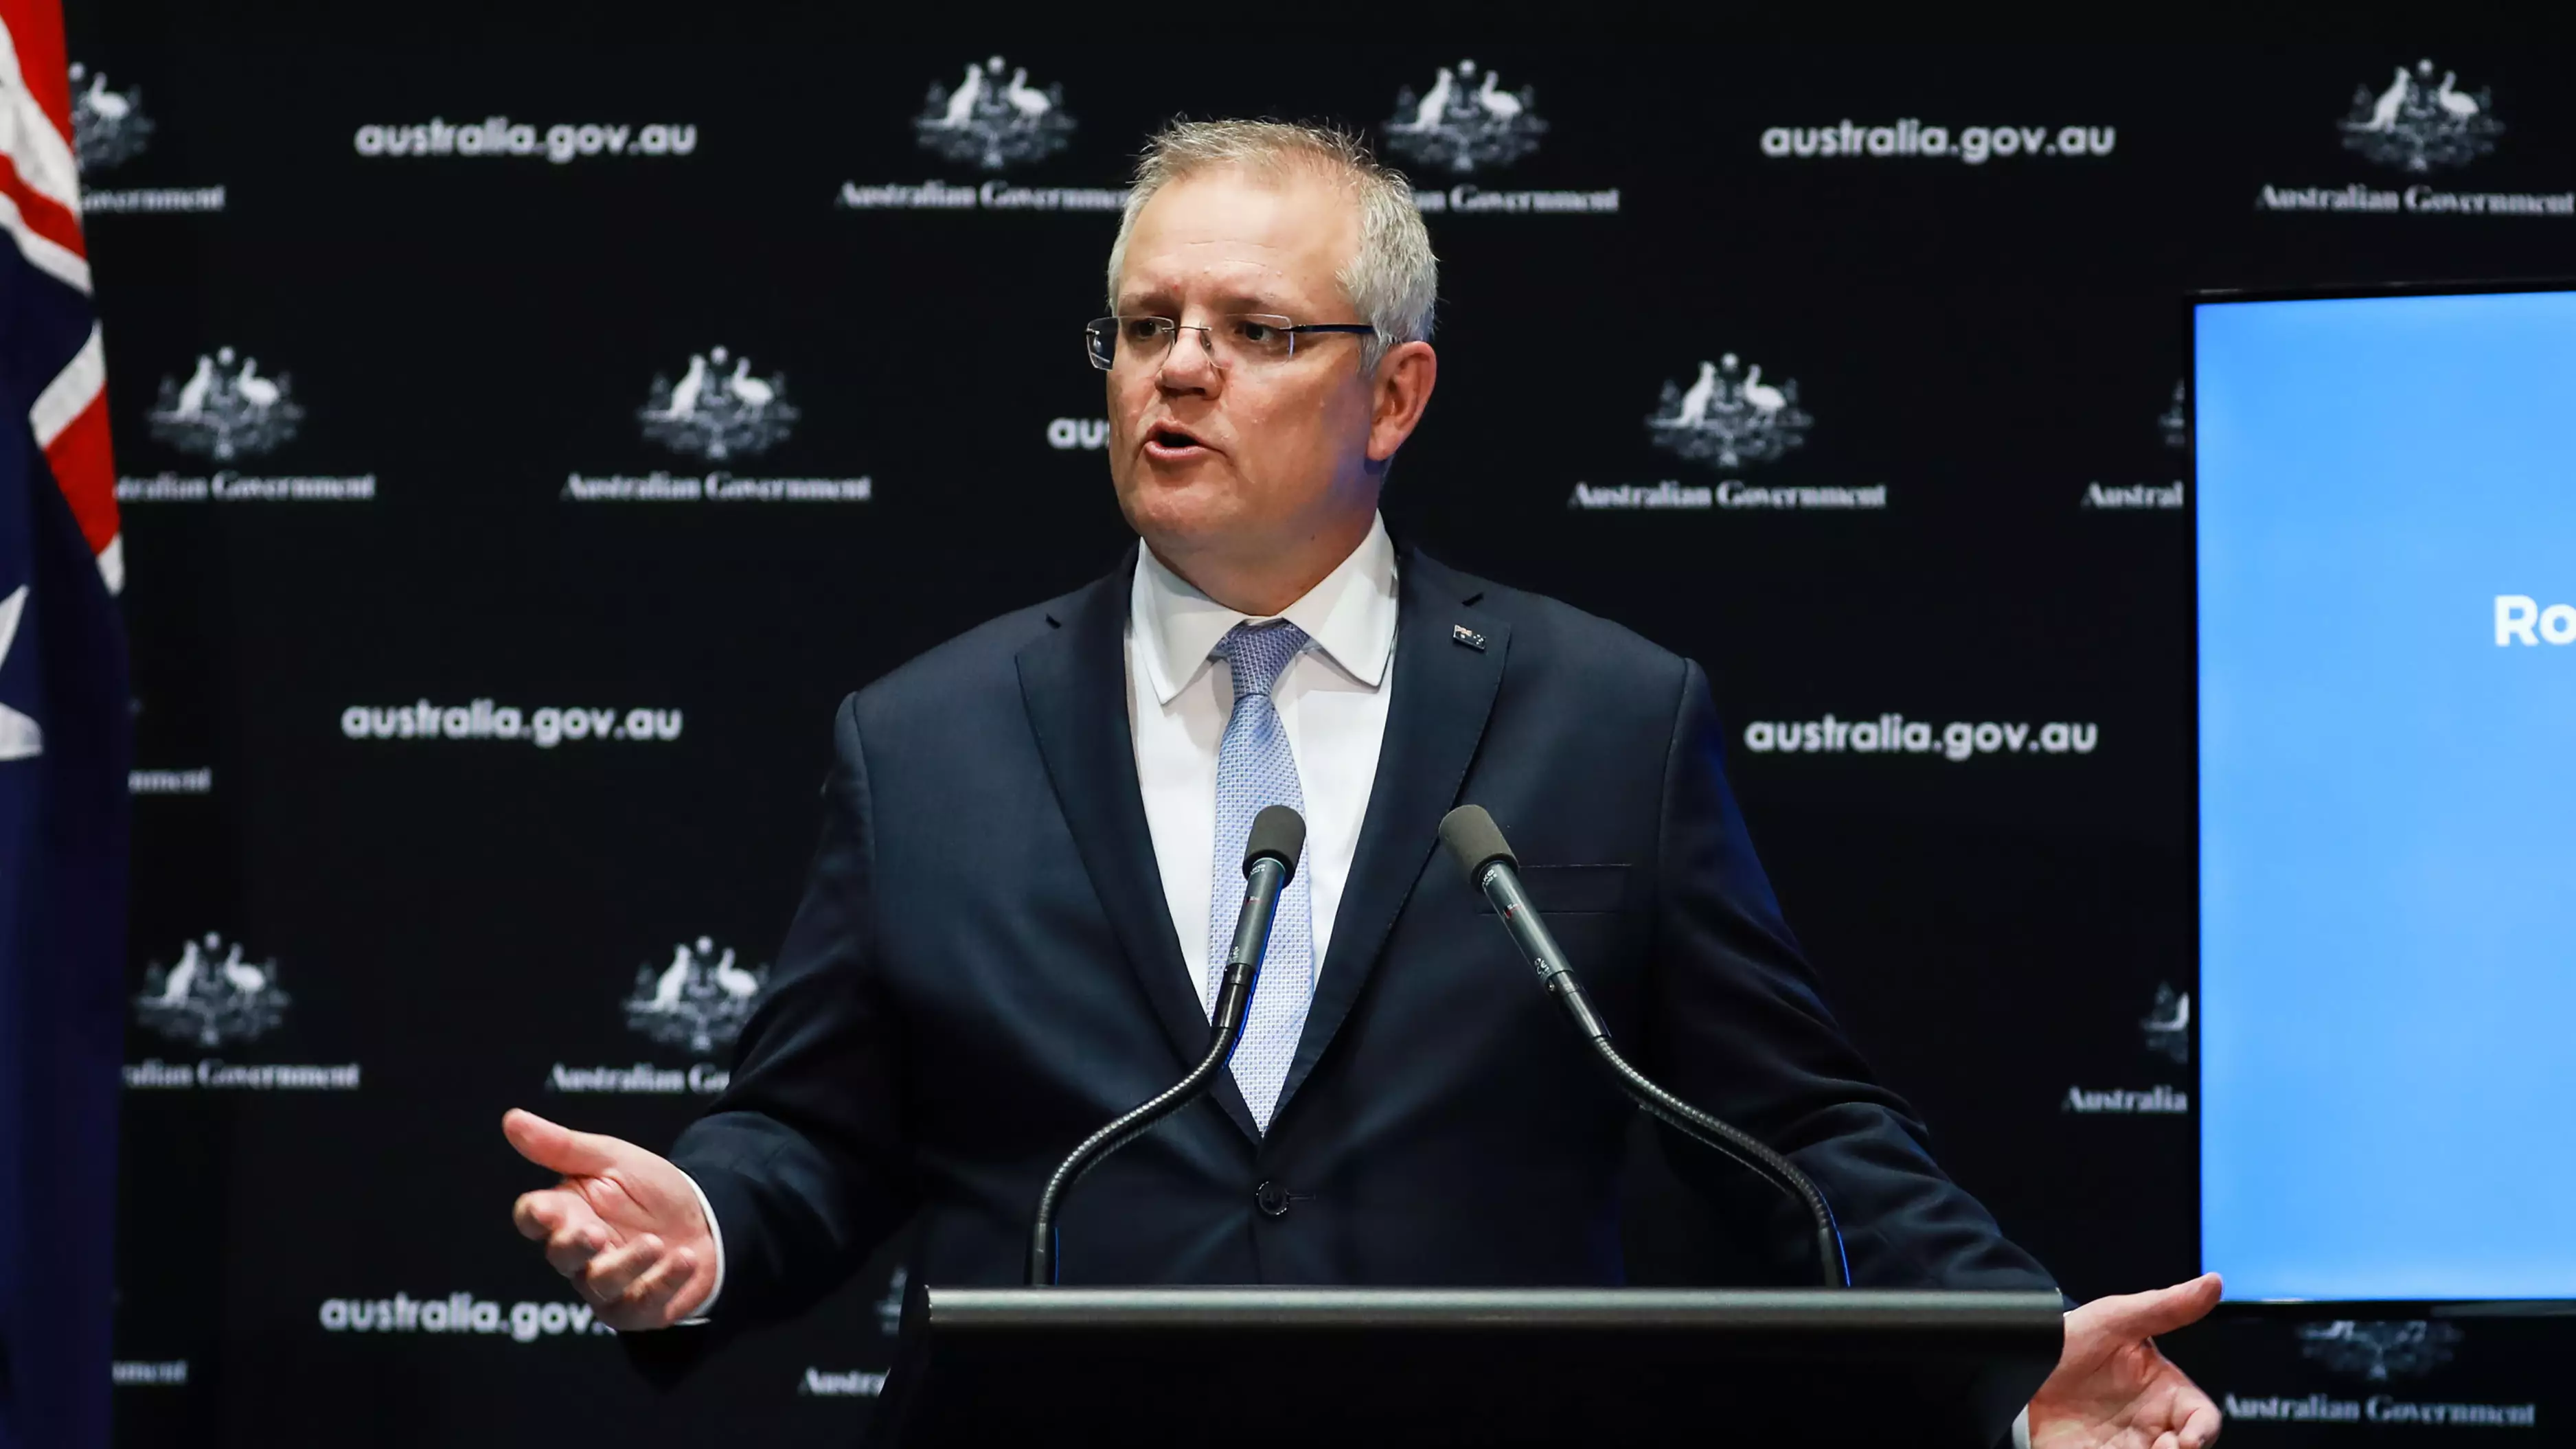 Australia Has Been Hit By A 'Large Scale' Cyber Attack By Foreign Government